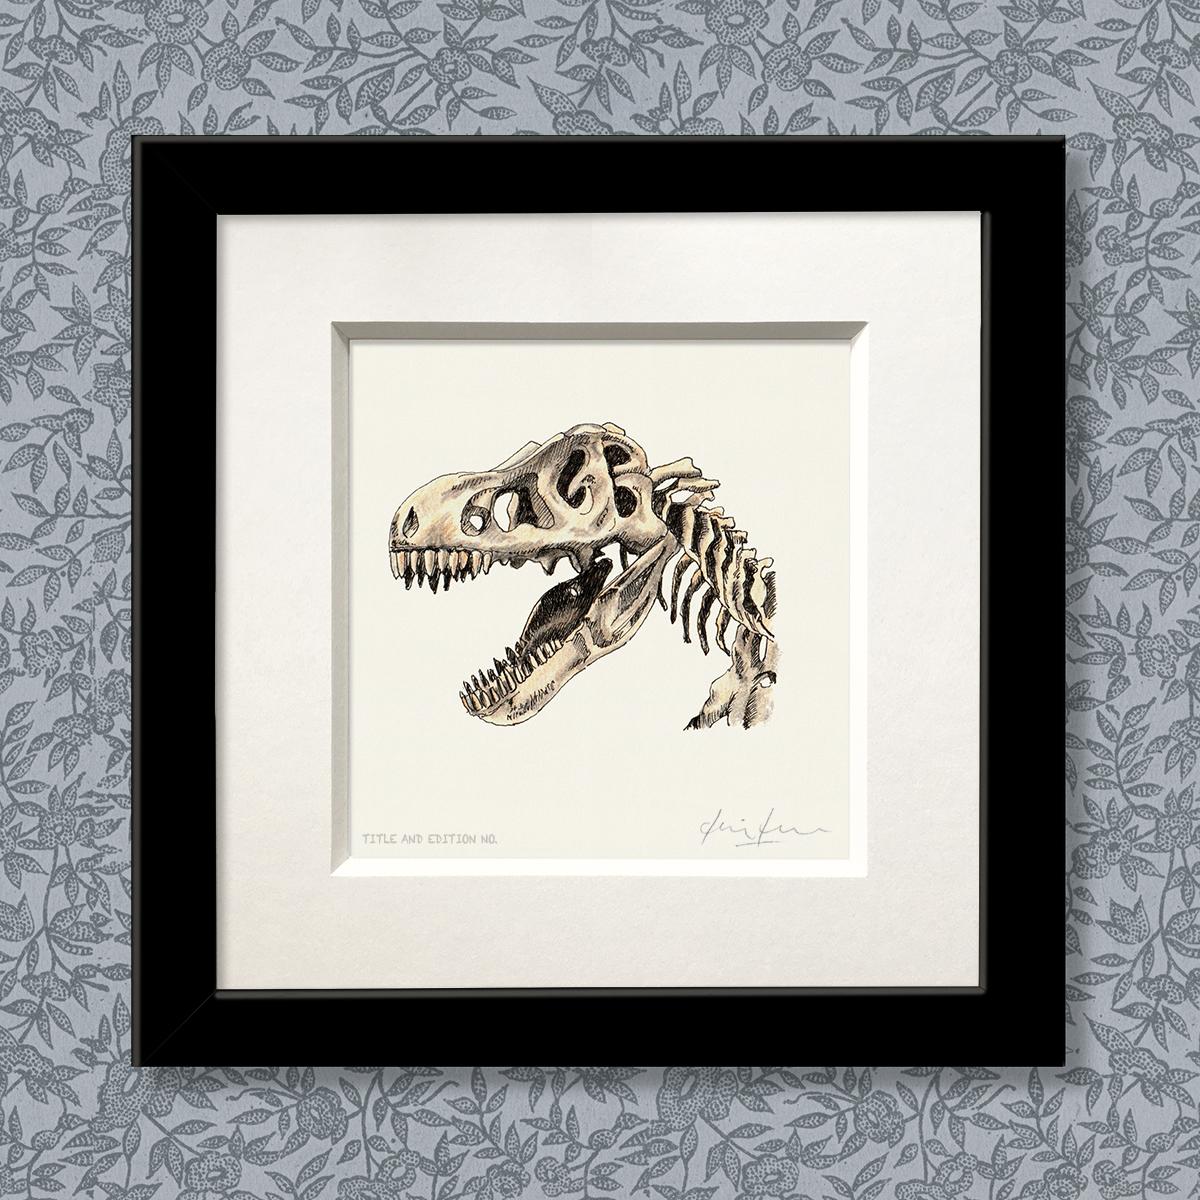 Limited edition print from pen & ink and coloured pencil drawing of a T Rex in a black frame